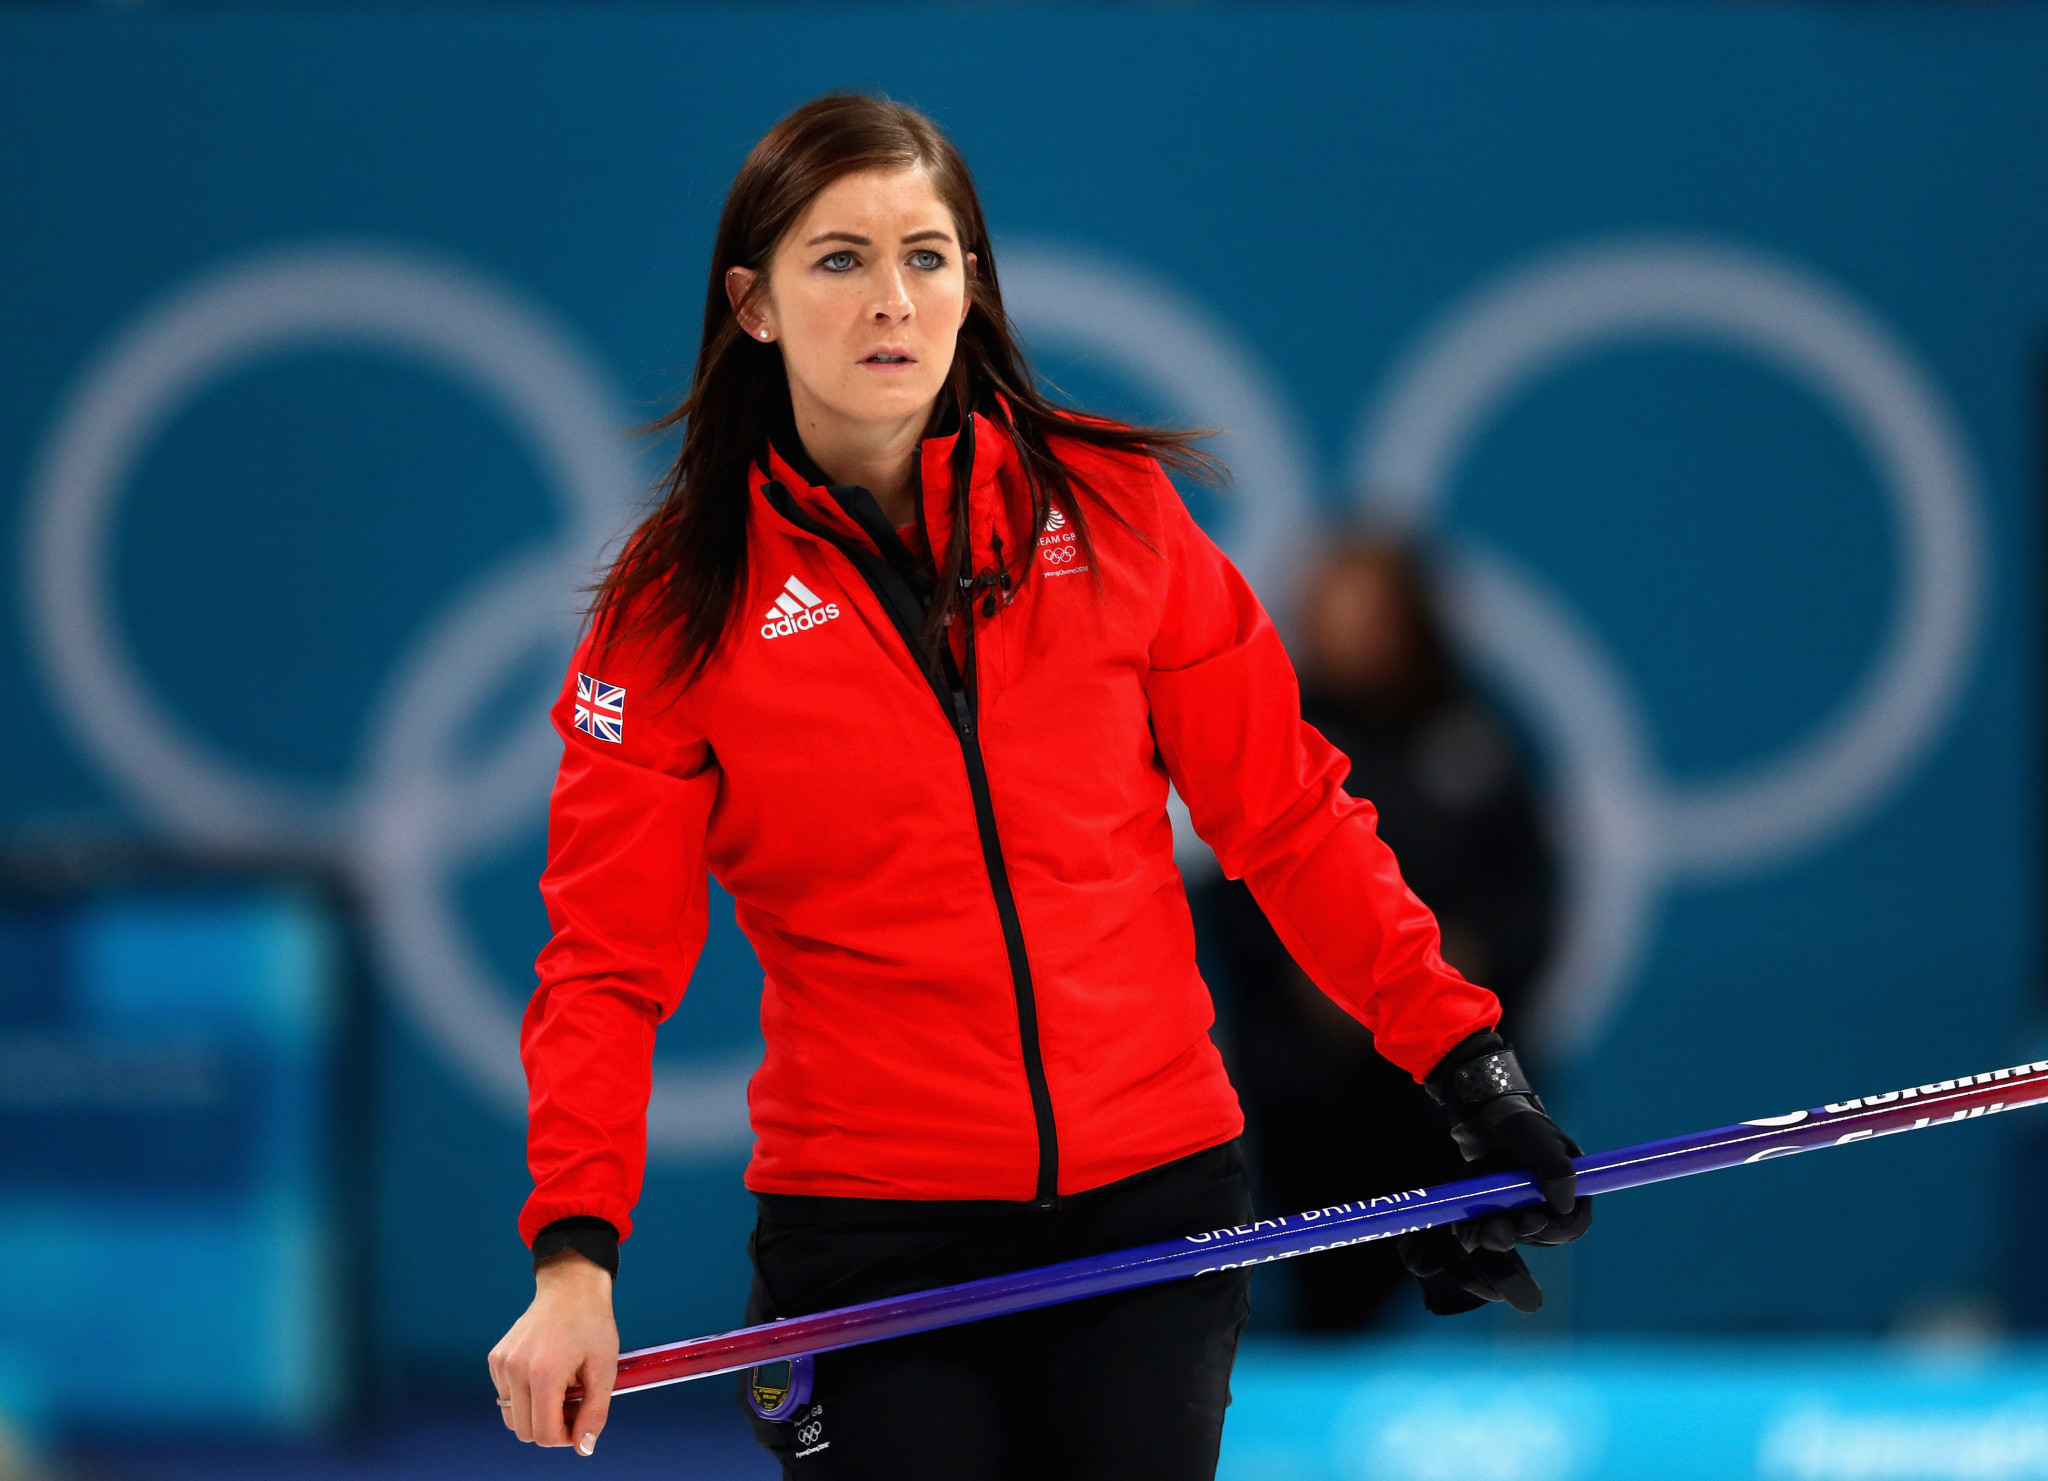 Eve Muirhead led Britain's women's team at last year's Winter Olympics in Pyeongchang ©Getty Images